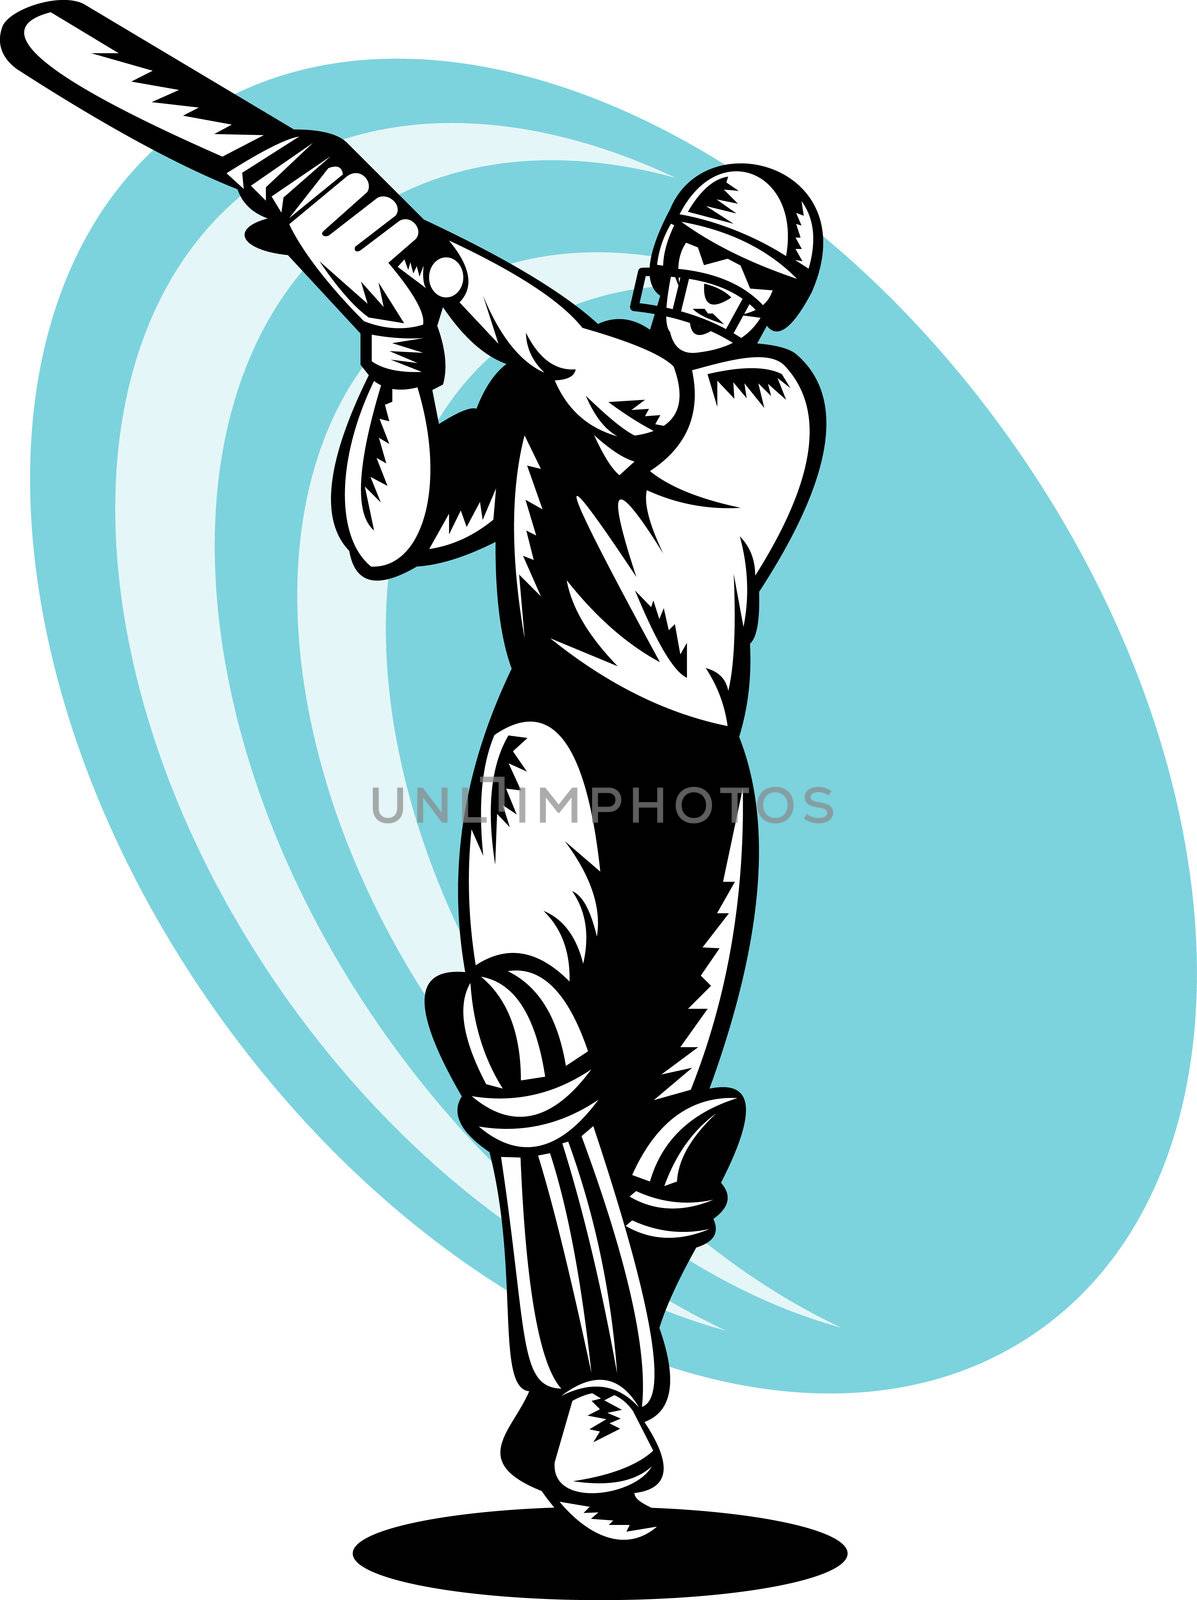 illustration of a cricket batsman batting front view done in retor woodcut style